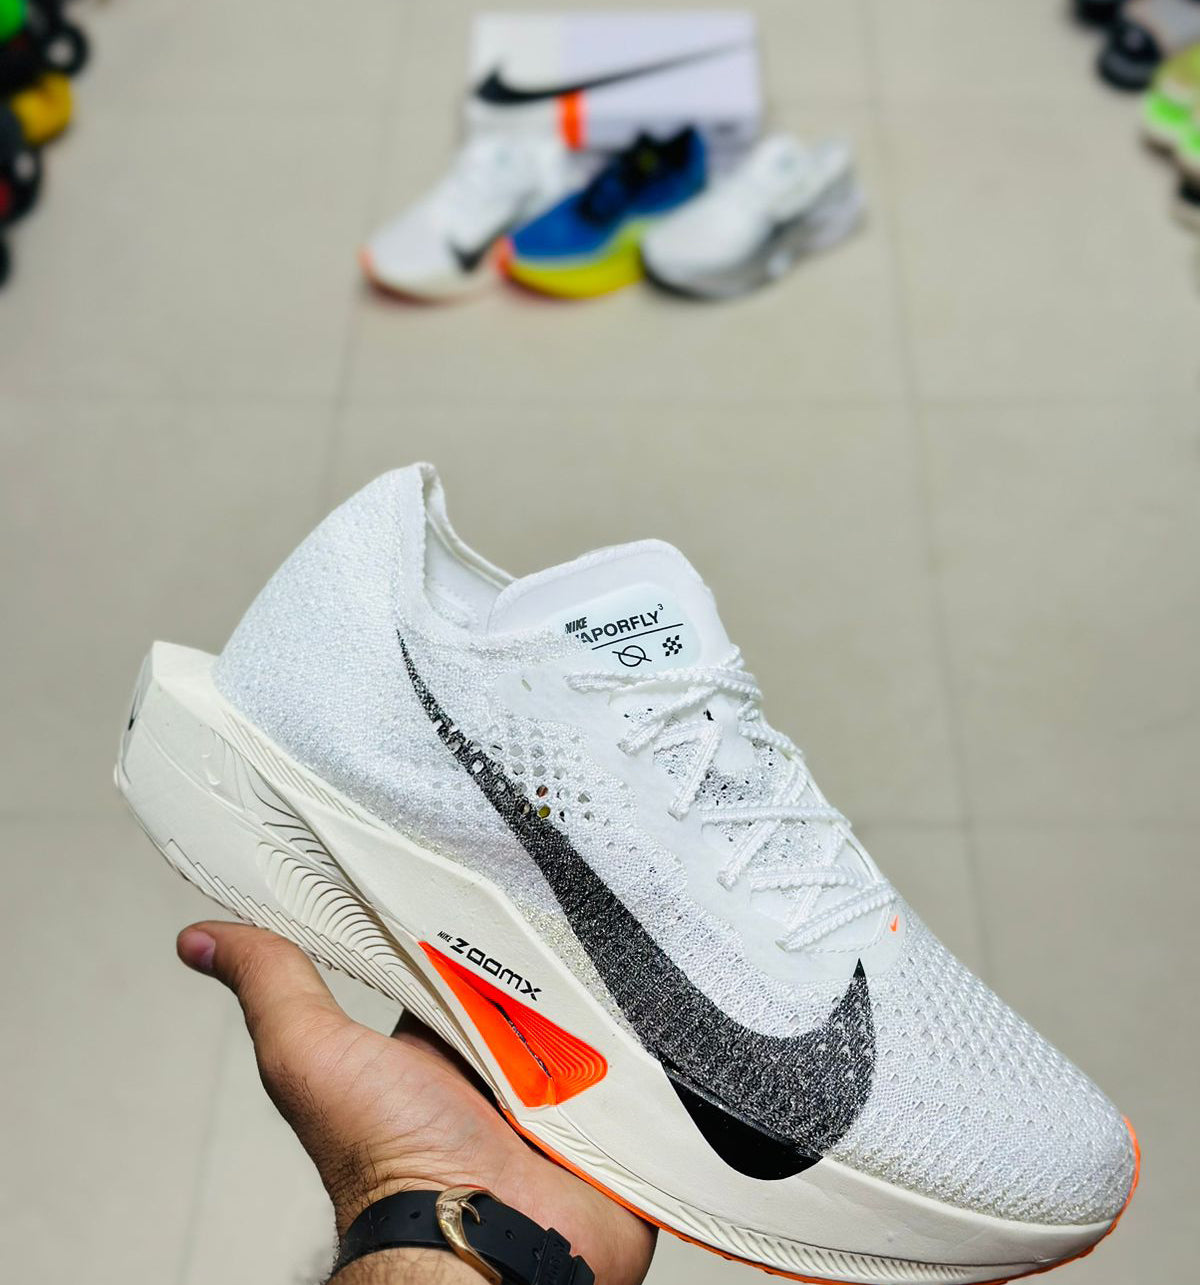 TOP 11 Nike Replica and Copy Shoes Sellers Online (January 2020 -- New Shoes  Added) | Nike shoes price, Nike shoes cheap, Running shoes nike